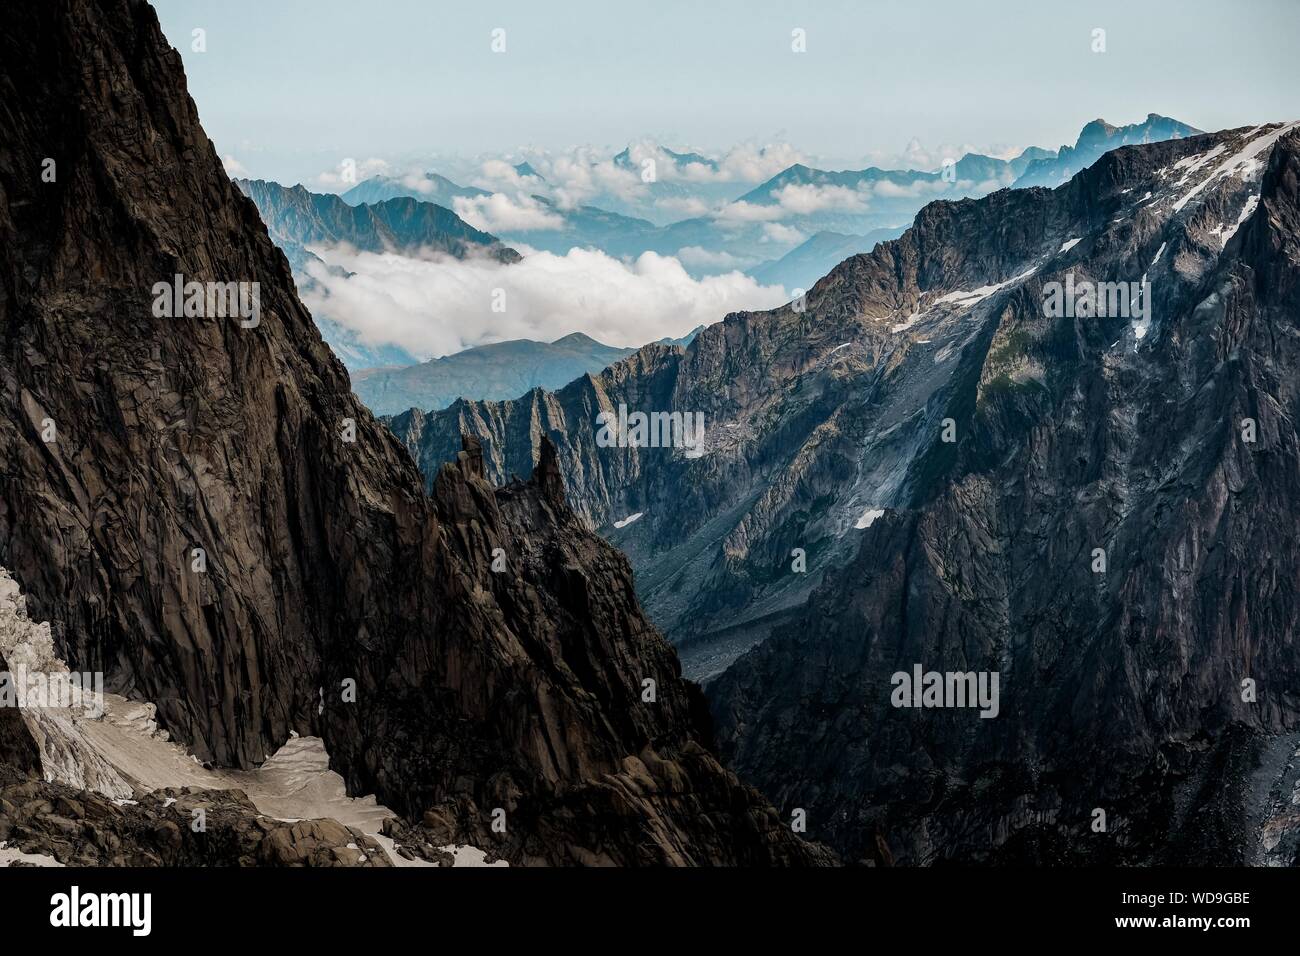 Beautiful shot of mountains with a clear sky in the background Stock Photo